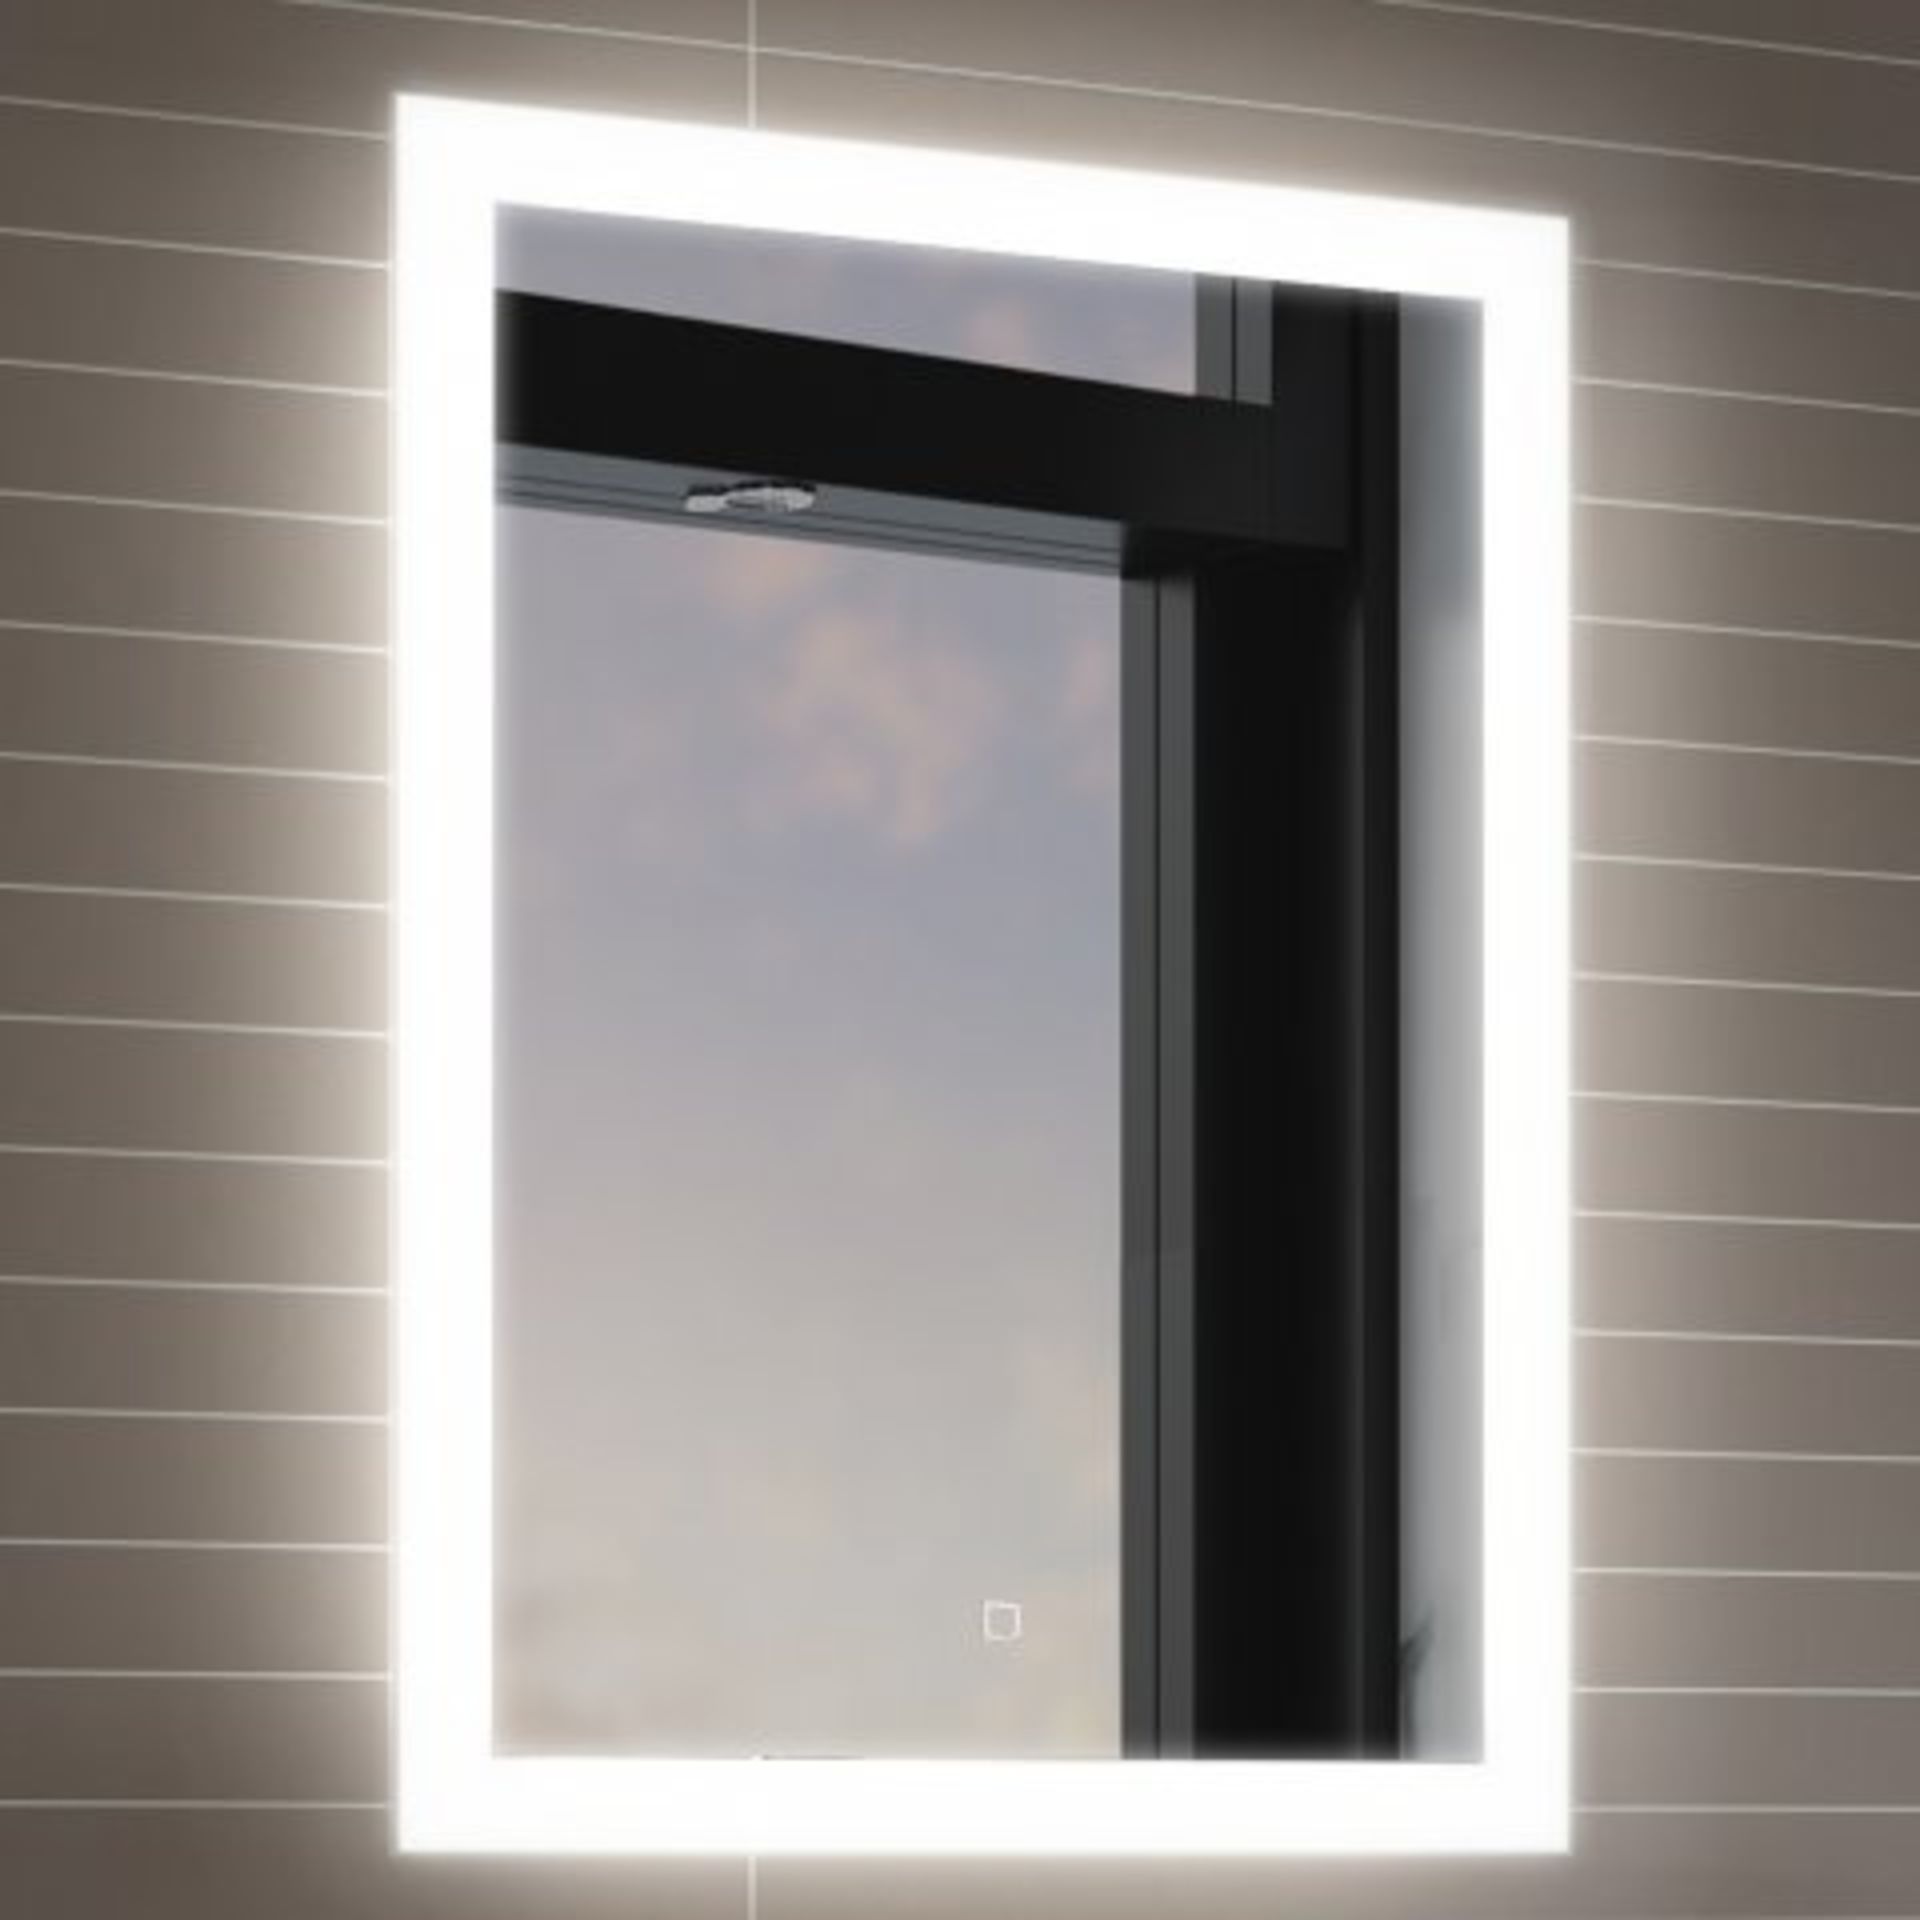 (138) 700x500mm Orion Illuminated LED Mirror - Switch Control. RRP £349.99. Light up your bathroom